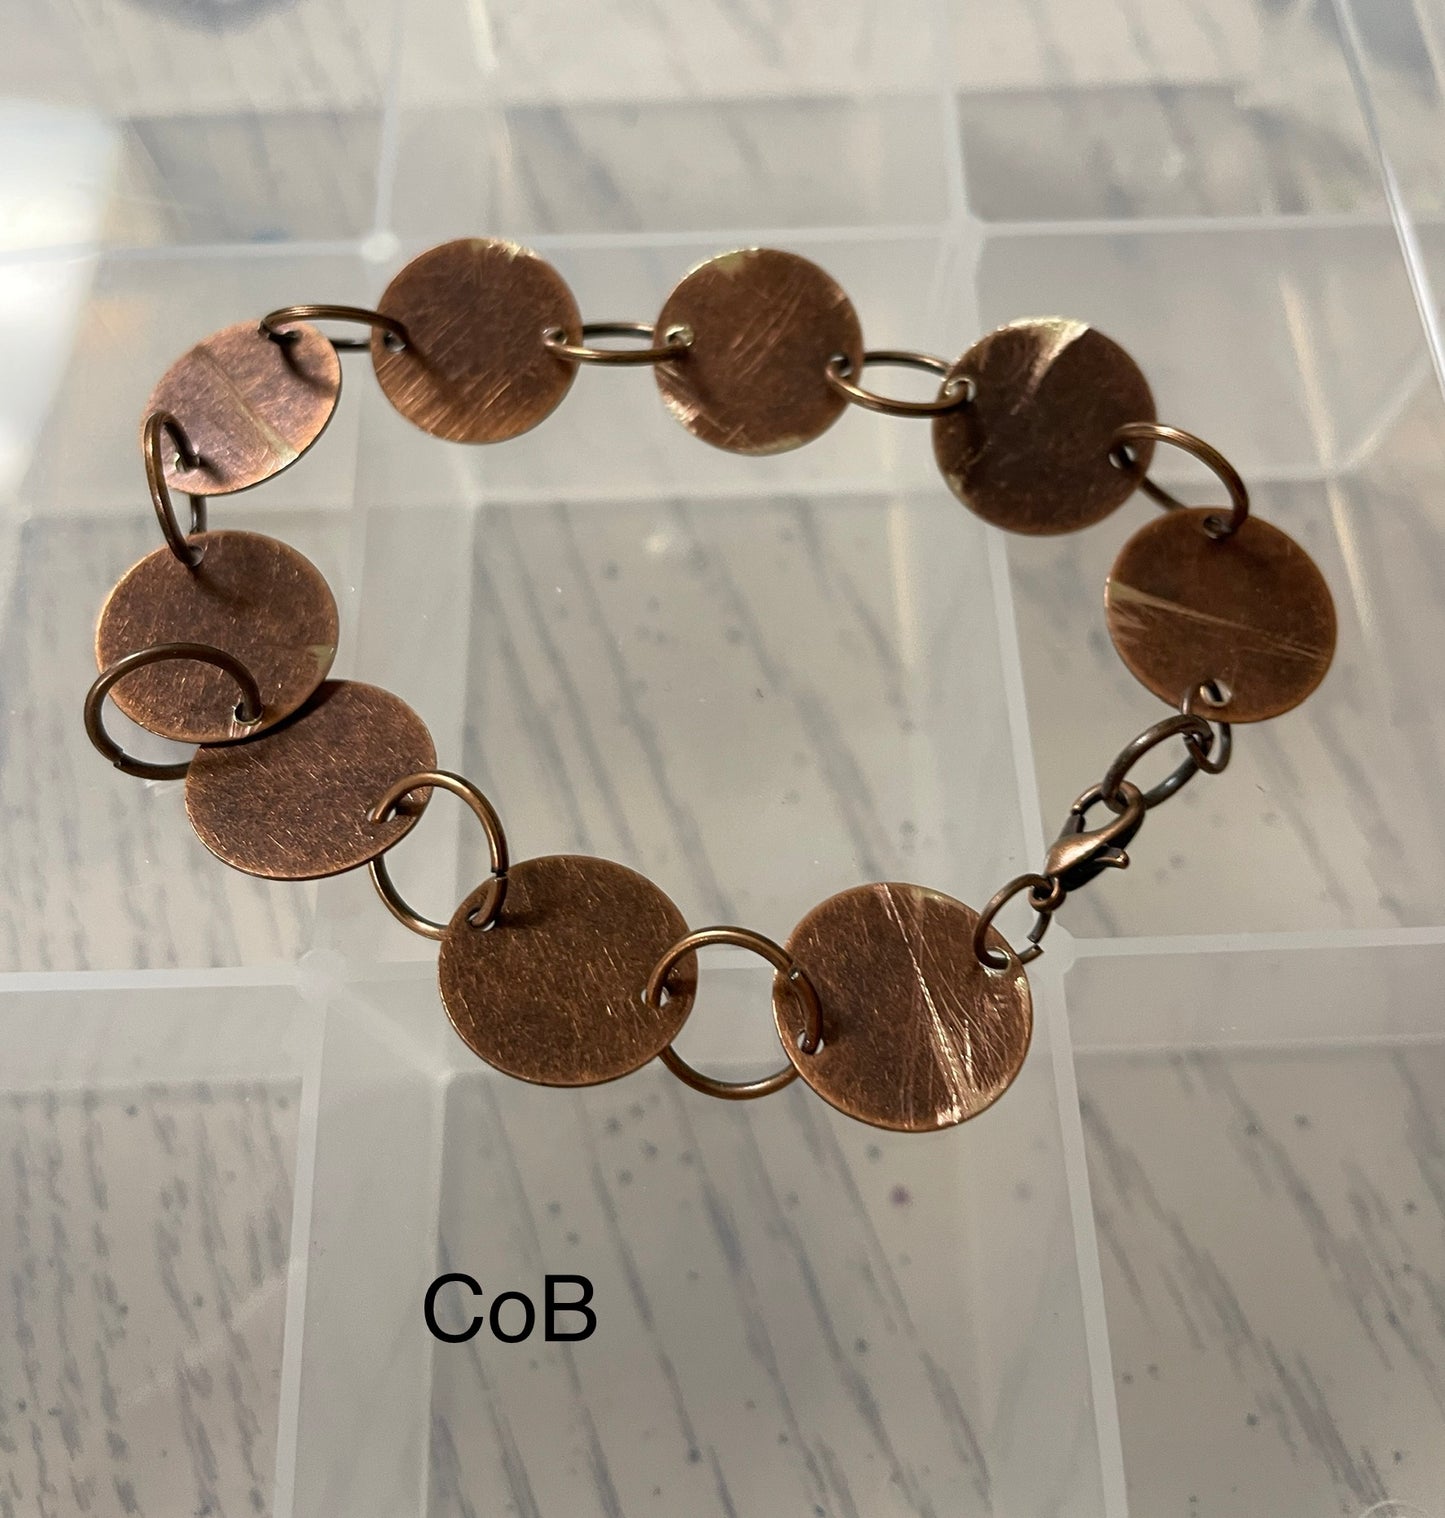 This copper bracelet is made from 1 inch round copper blanks and handmade round links. The bracelet is finished with a lobster clasp.